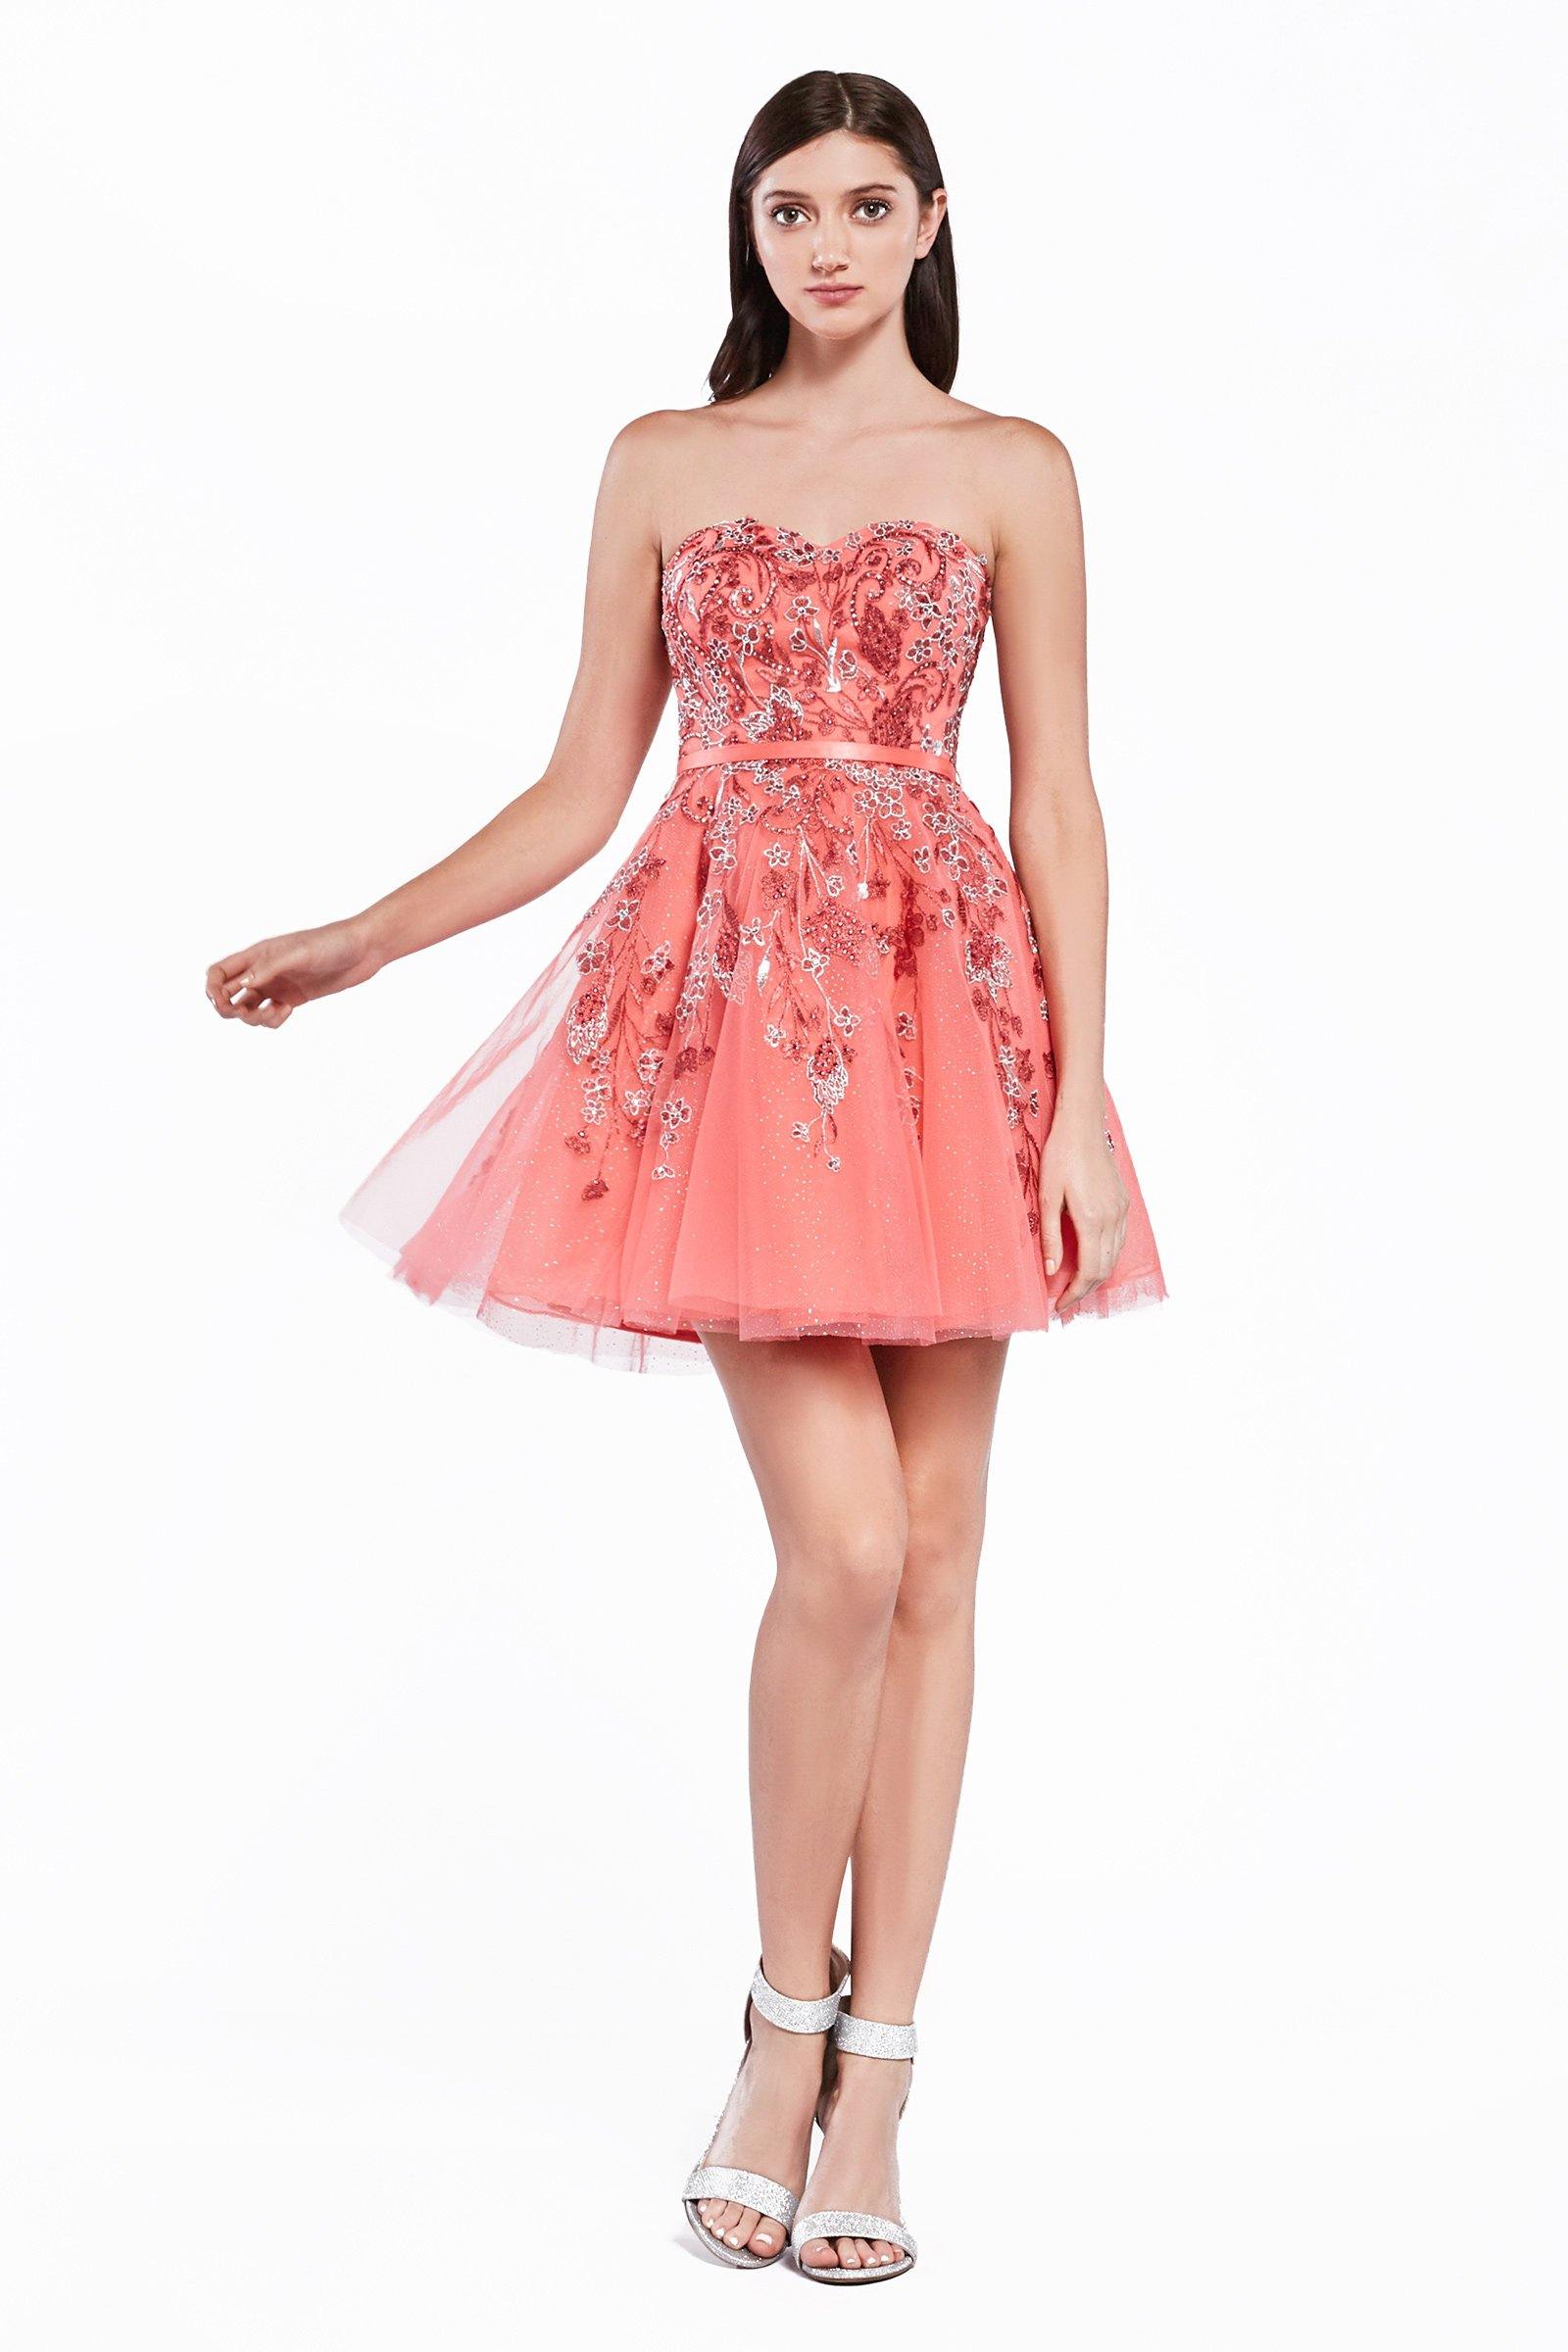 Homecoming Short Strapless Floral Cocktail Prom Dress - The Dress Outlet Cinderella Divine